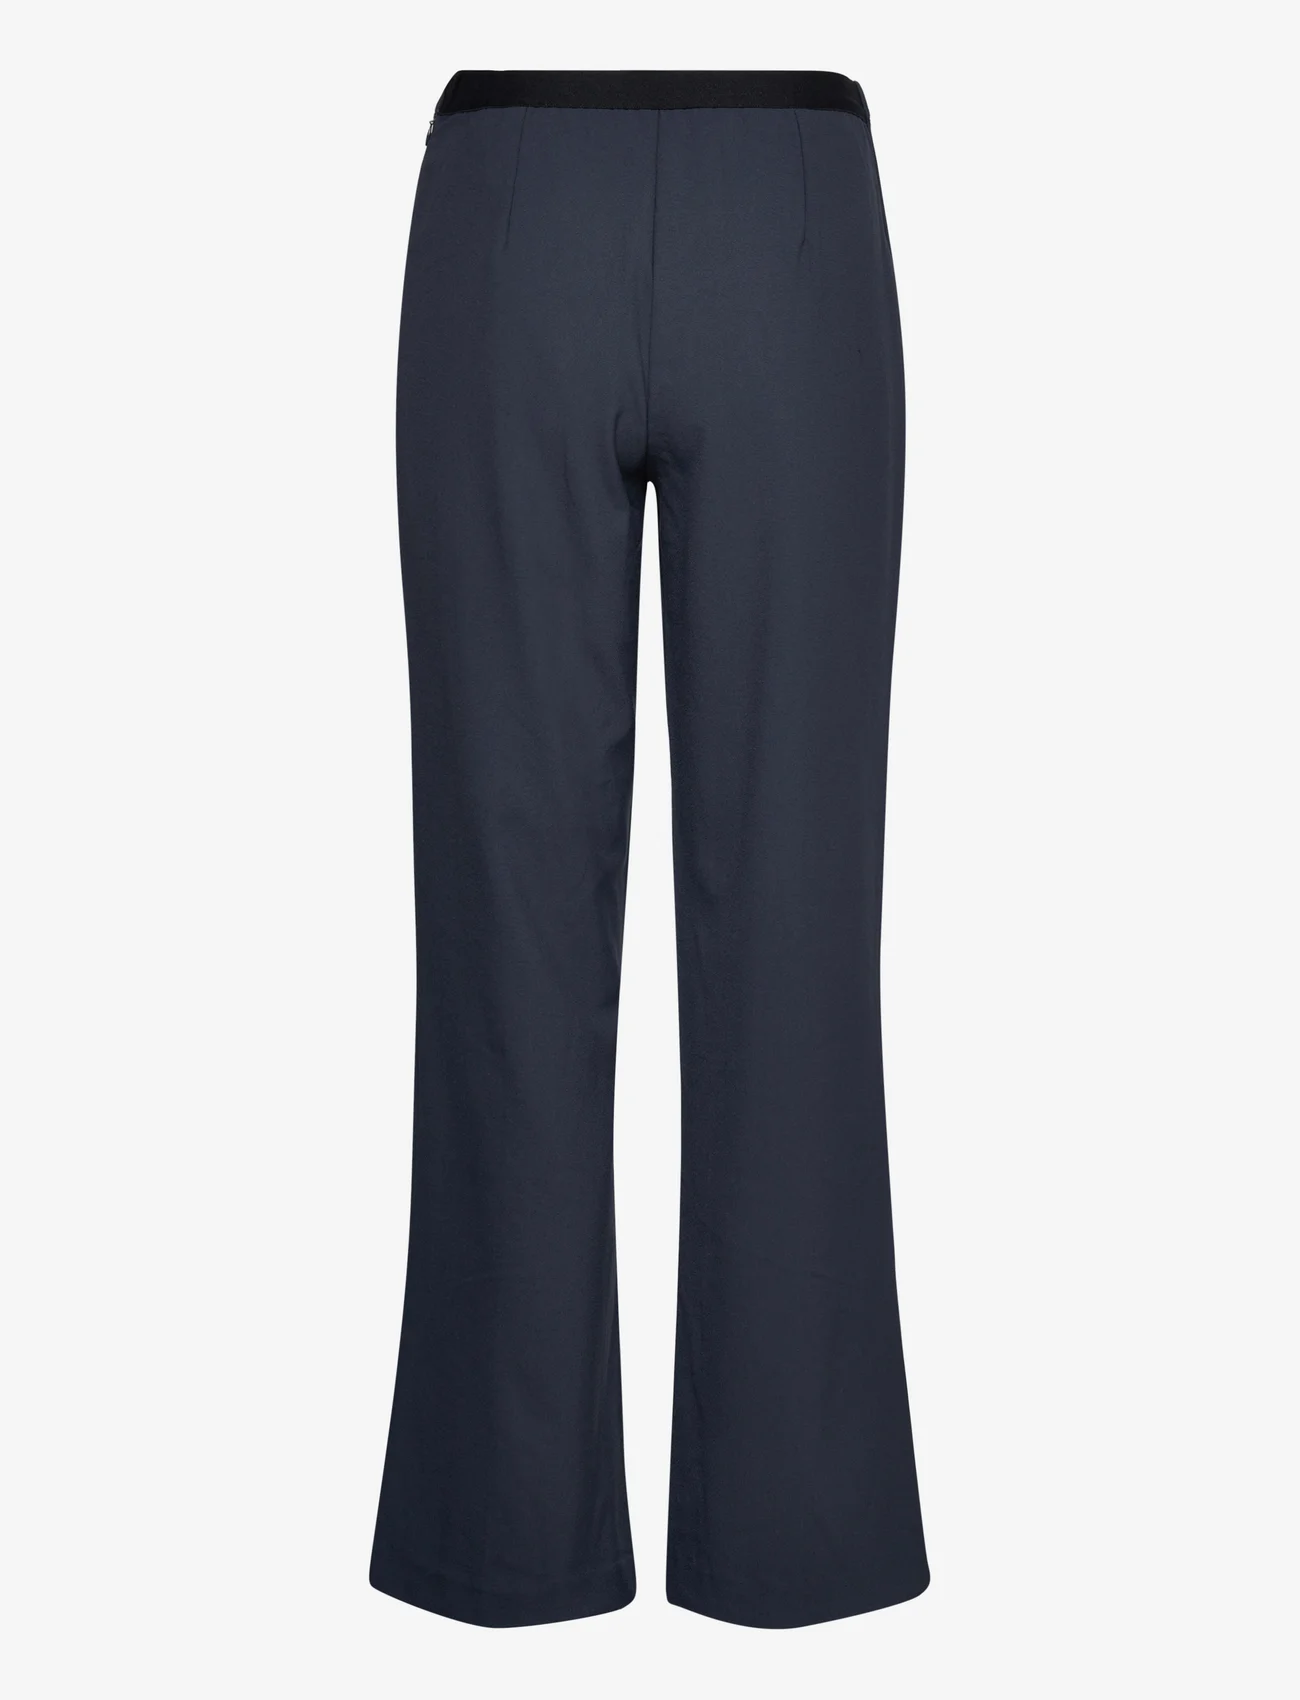 Mads Nørgaard - Recycled Sportina Pirla Pants FAV - damen - magical forest - 1